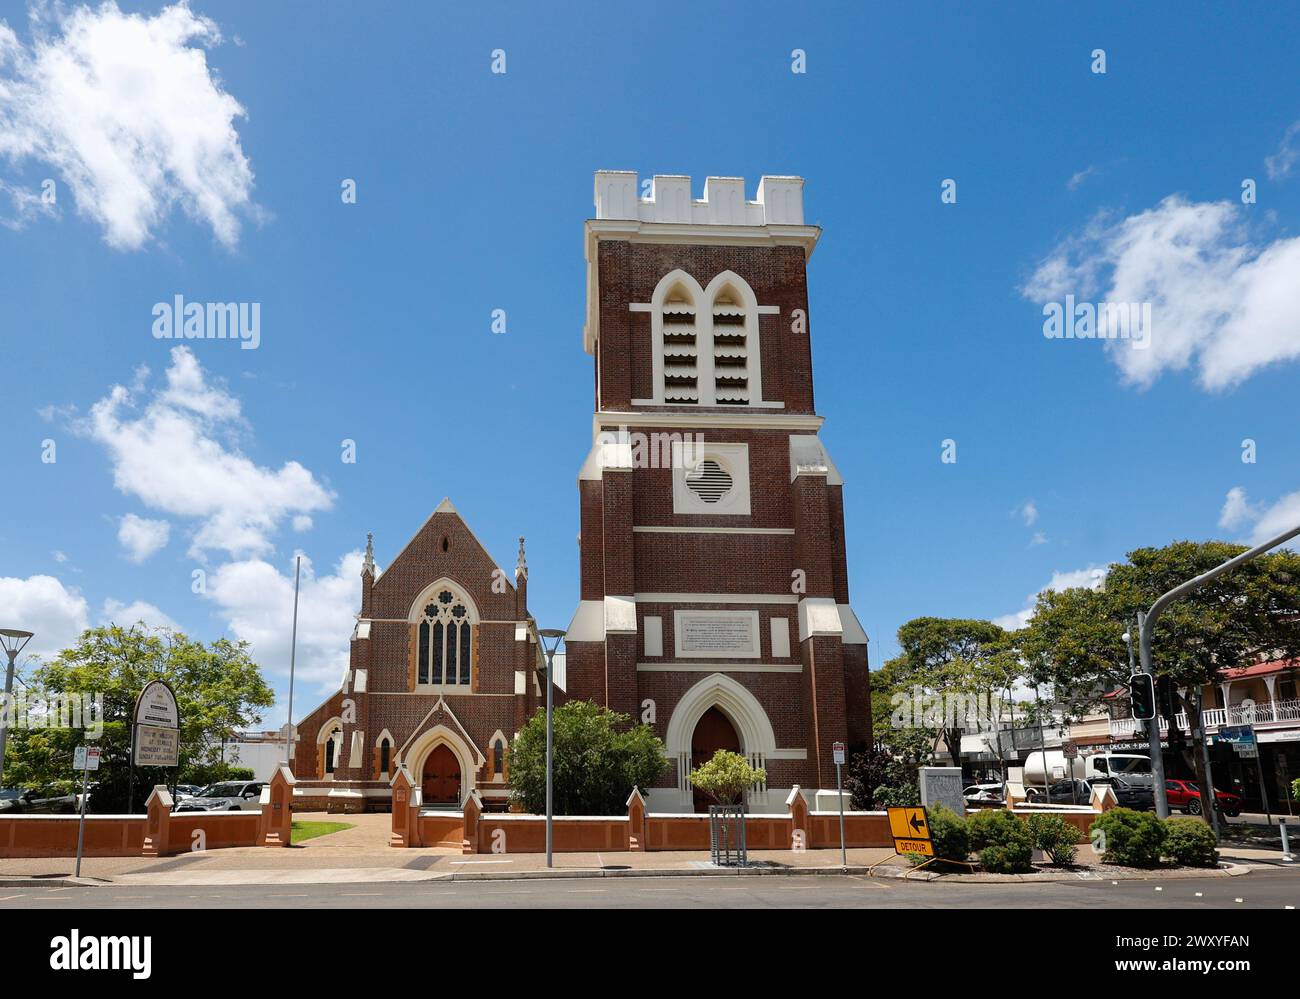 St Paul's Anglican Church and bell tower, Maryborough, Queensland, Australia Stock Photo